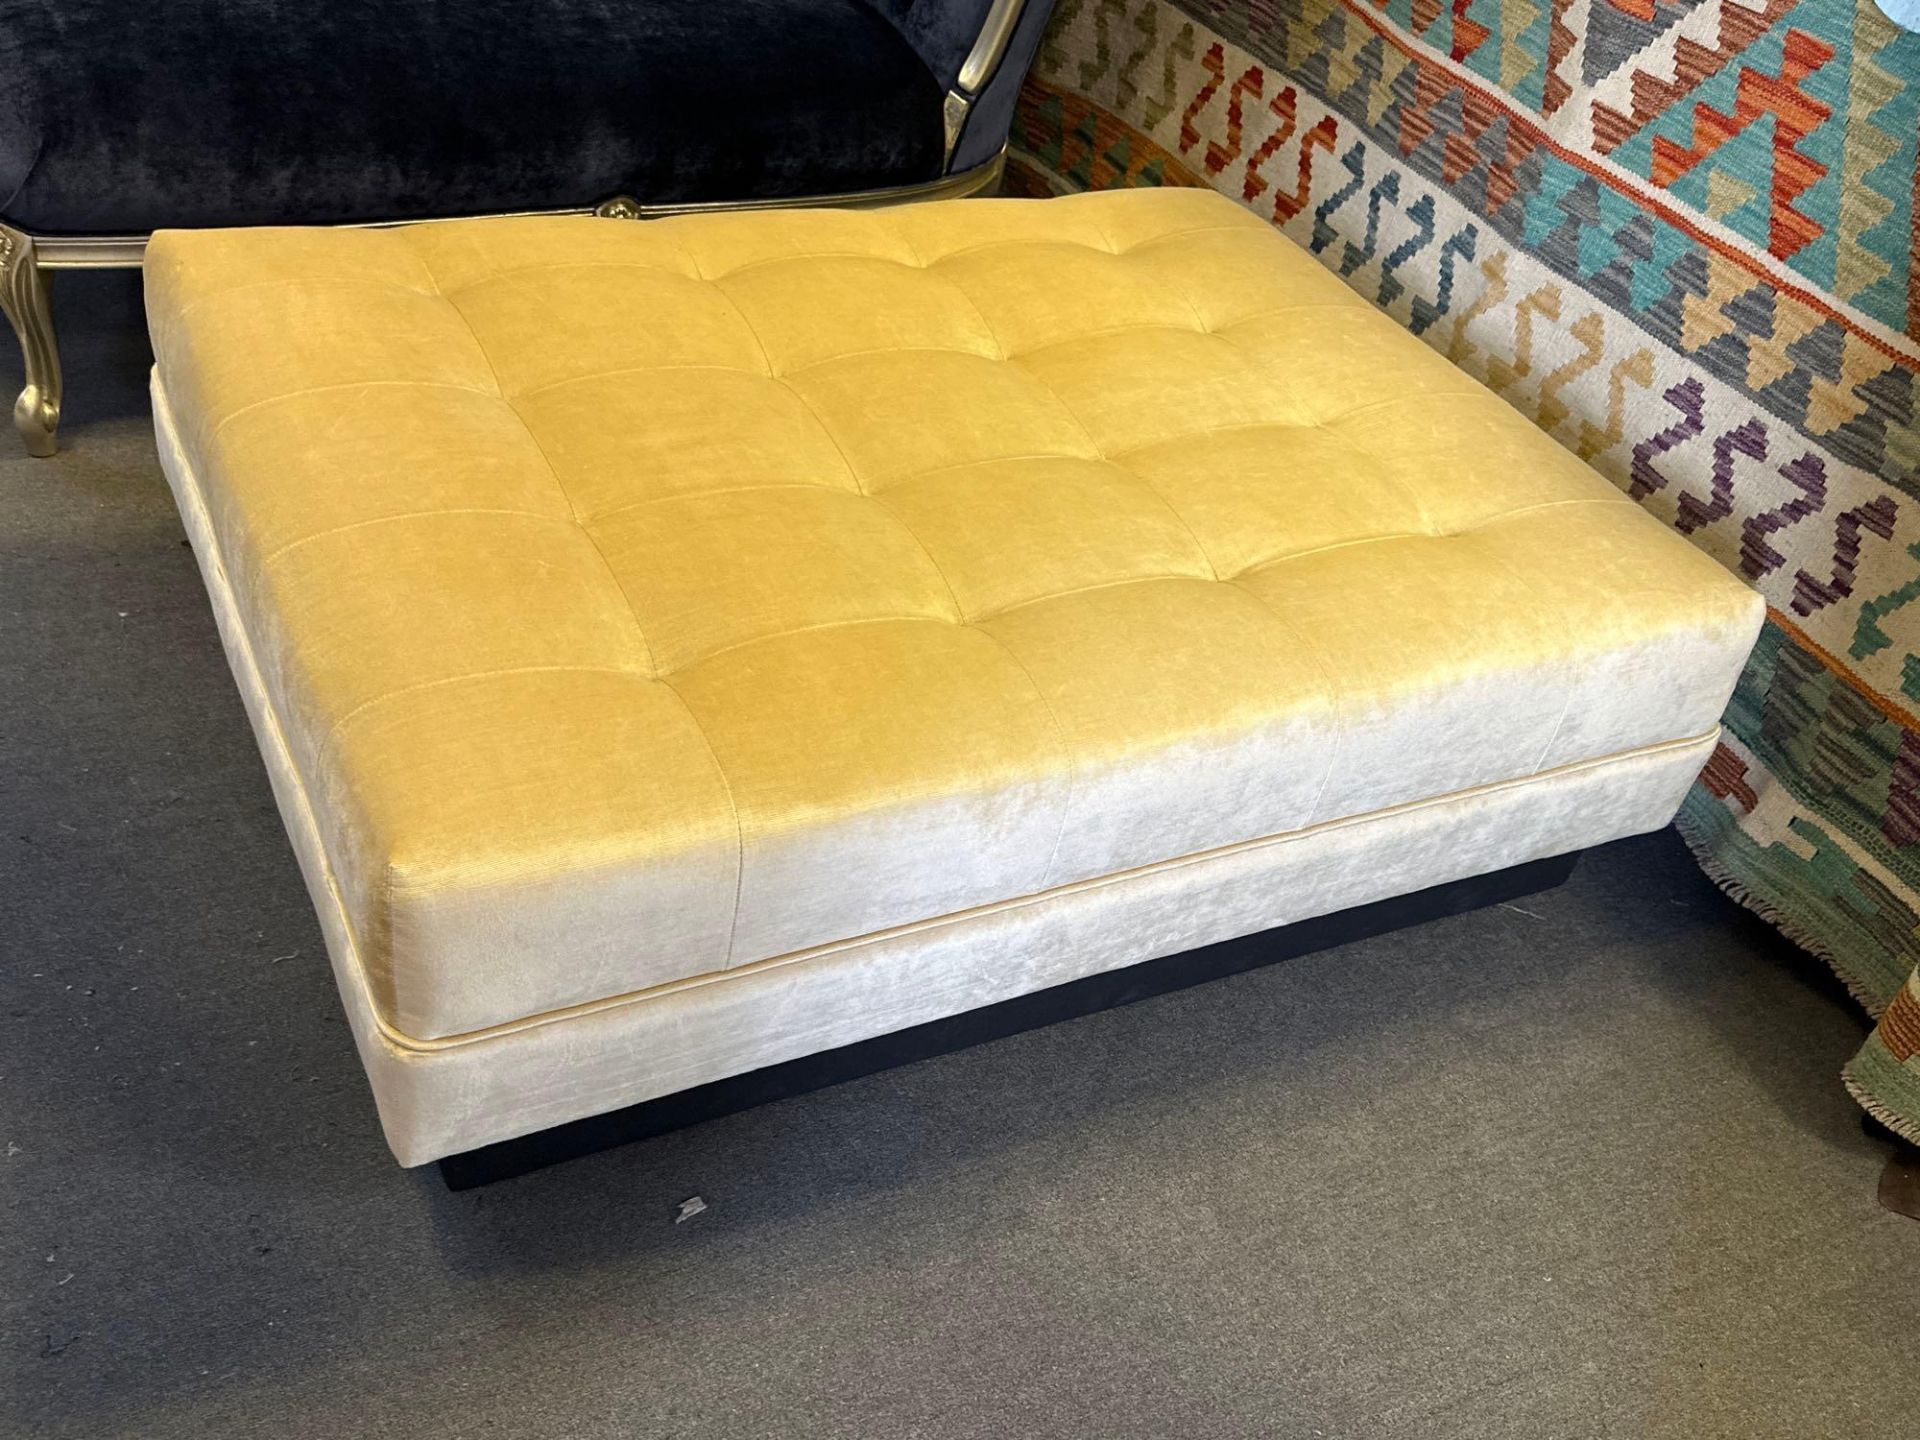 Pin Tuck Extra Large Bespoke Golden Yellow Footstool Coffee Table Ottoman Plush Upholstered - Image 3 of 6